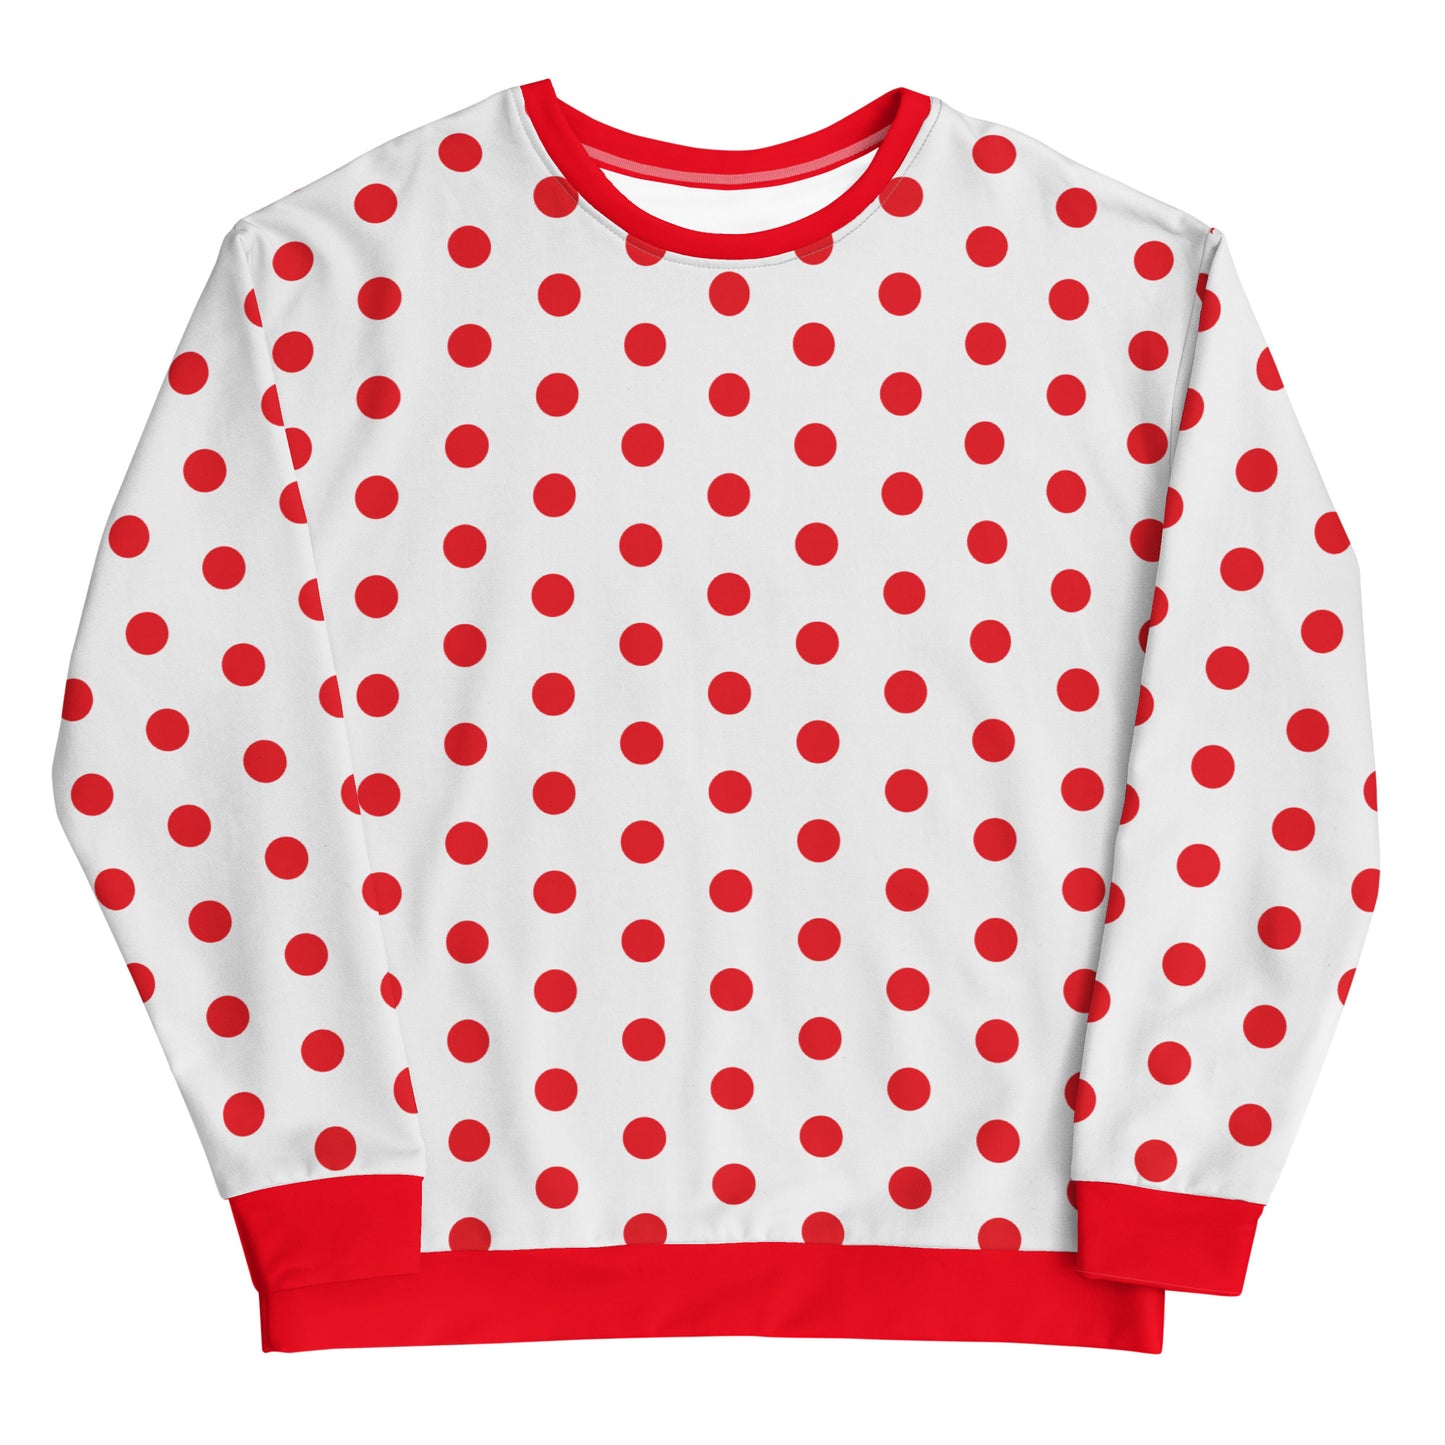 Red Polkadot - Inspired By Harry Styles - Sustainably Made Sweatshirt